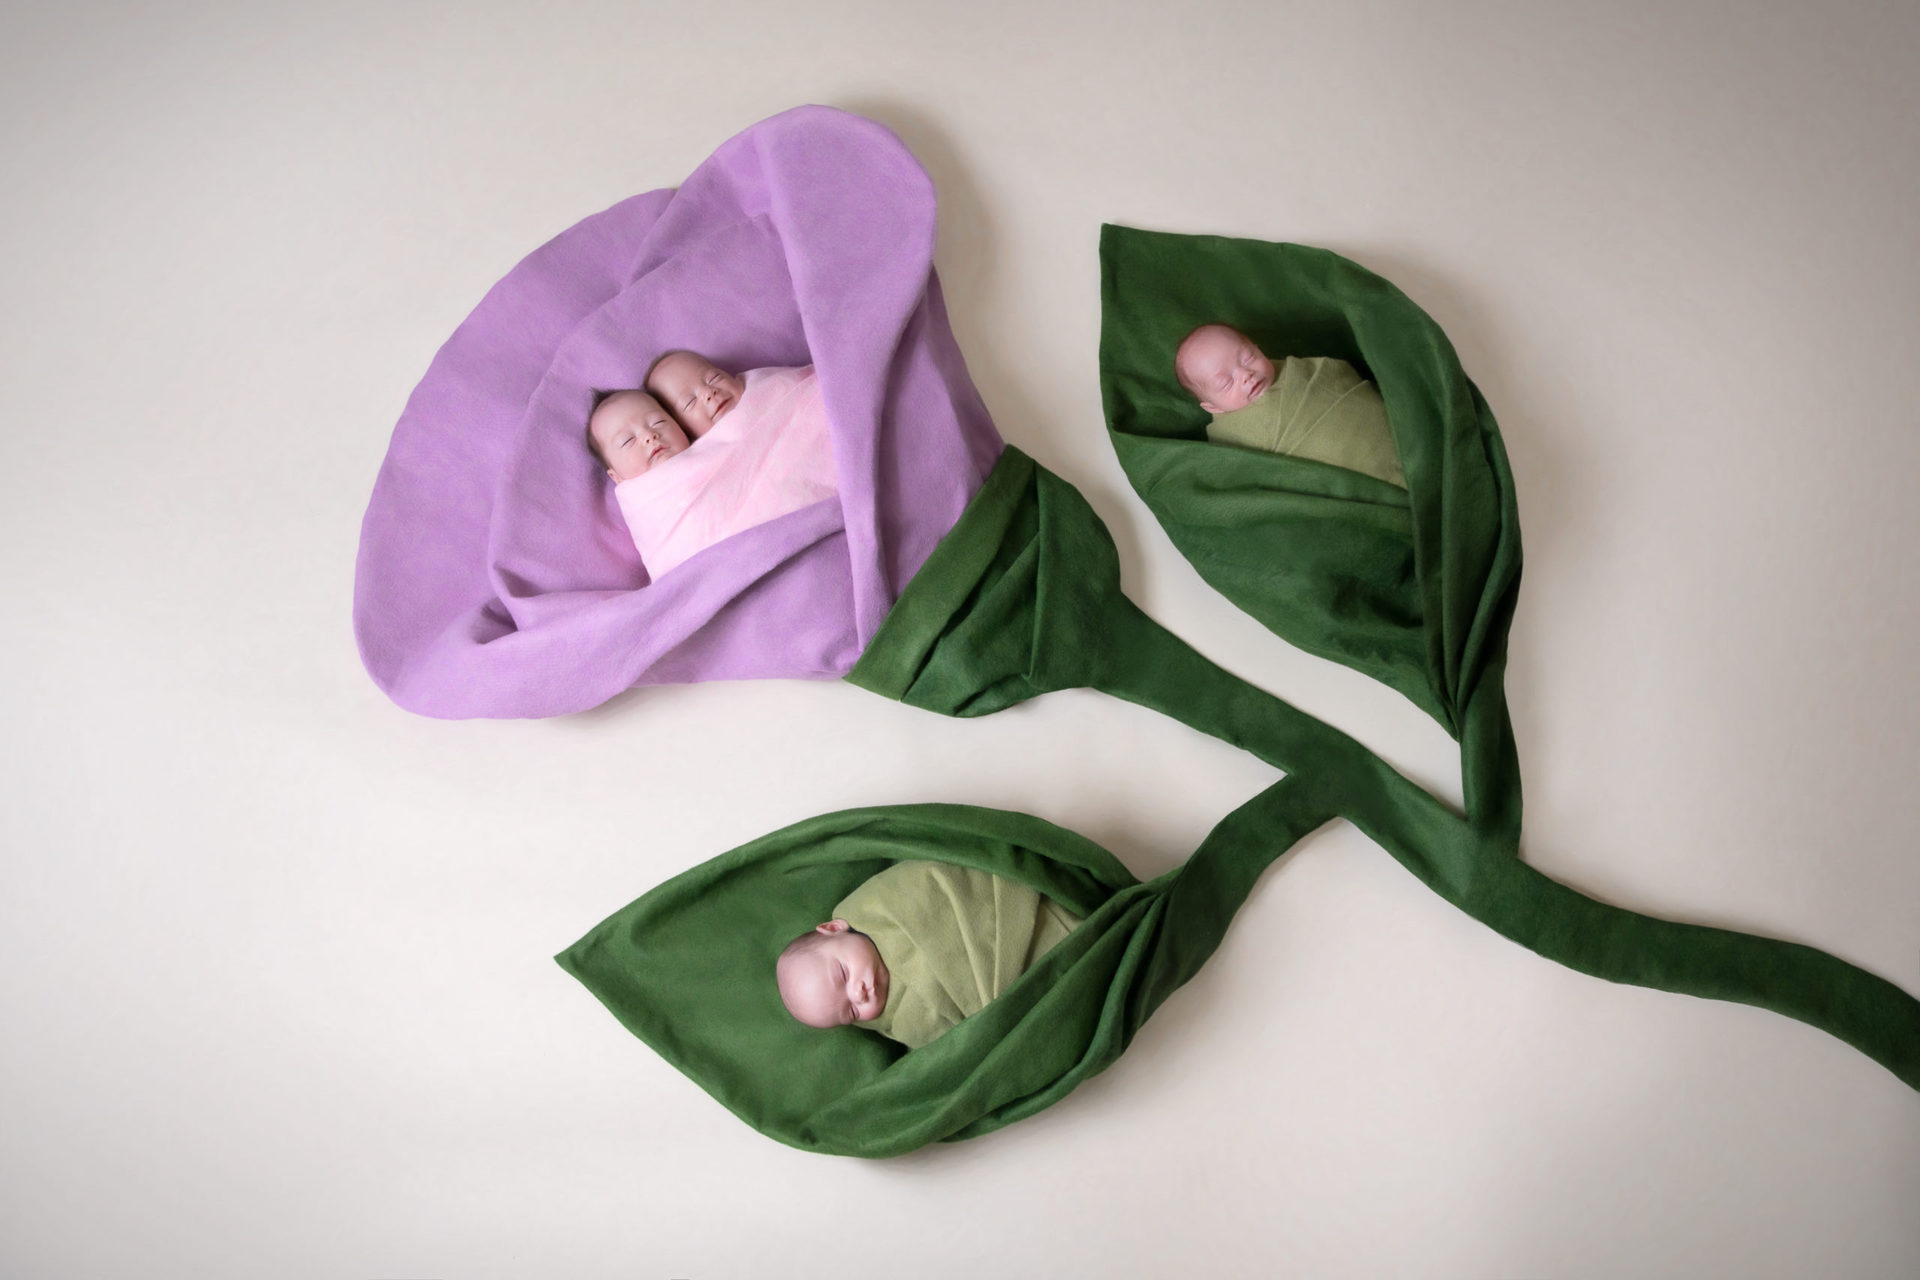 Artistic flower shape set up shows 4 newborn siblings. Two of them are wrapped together on pink two newborns are wrapped separately on green colors. Light backdrop. 90 degrees shot.